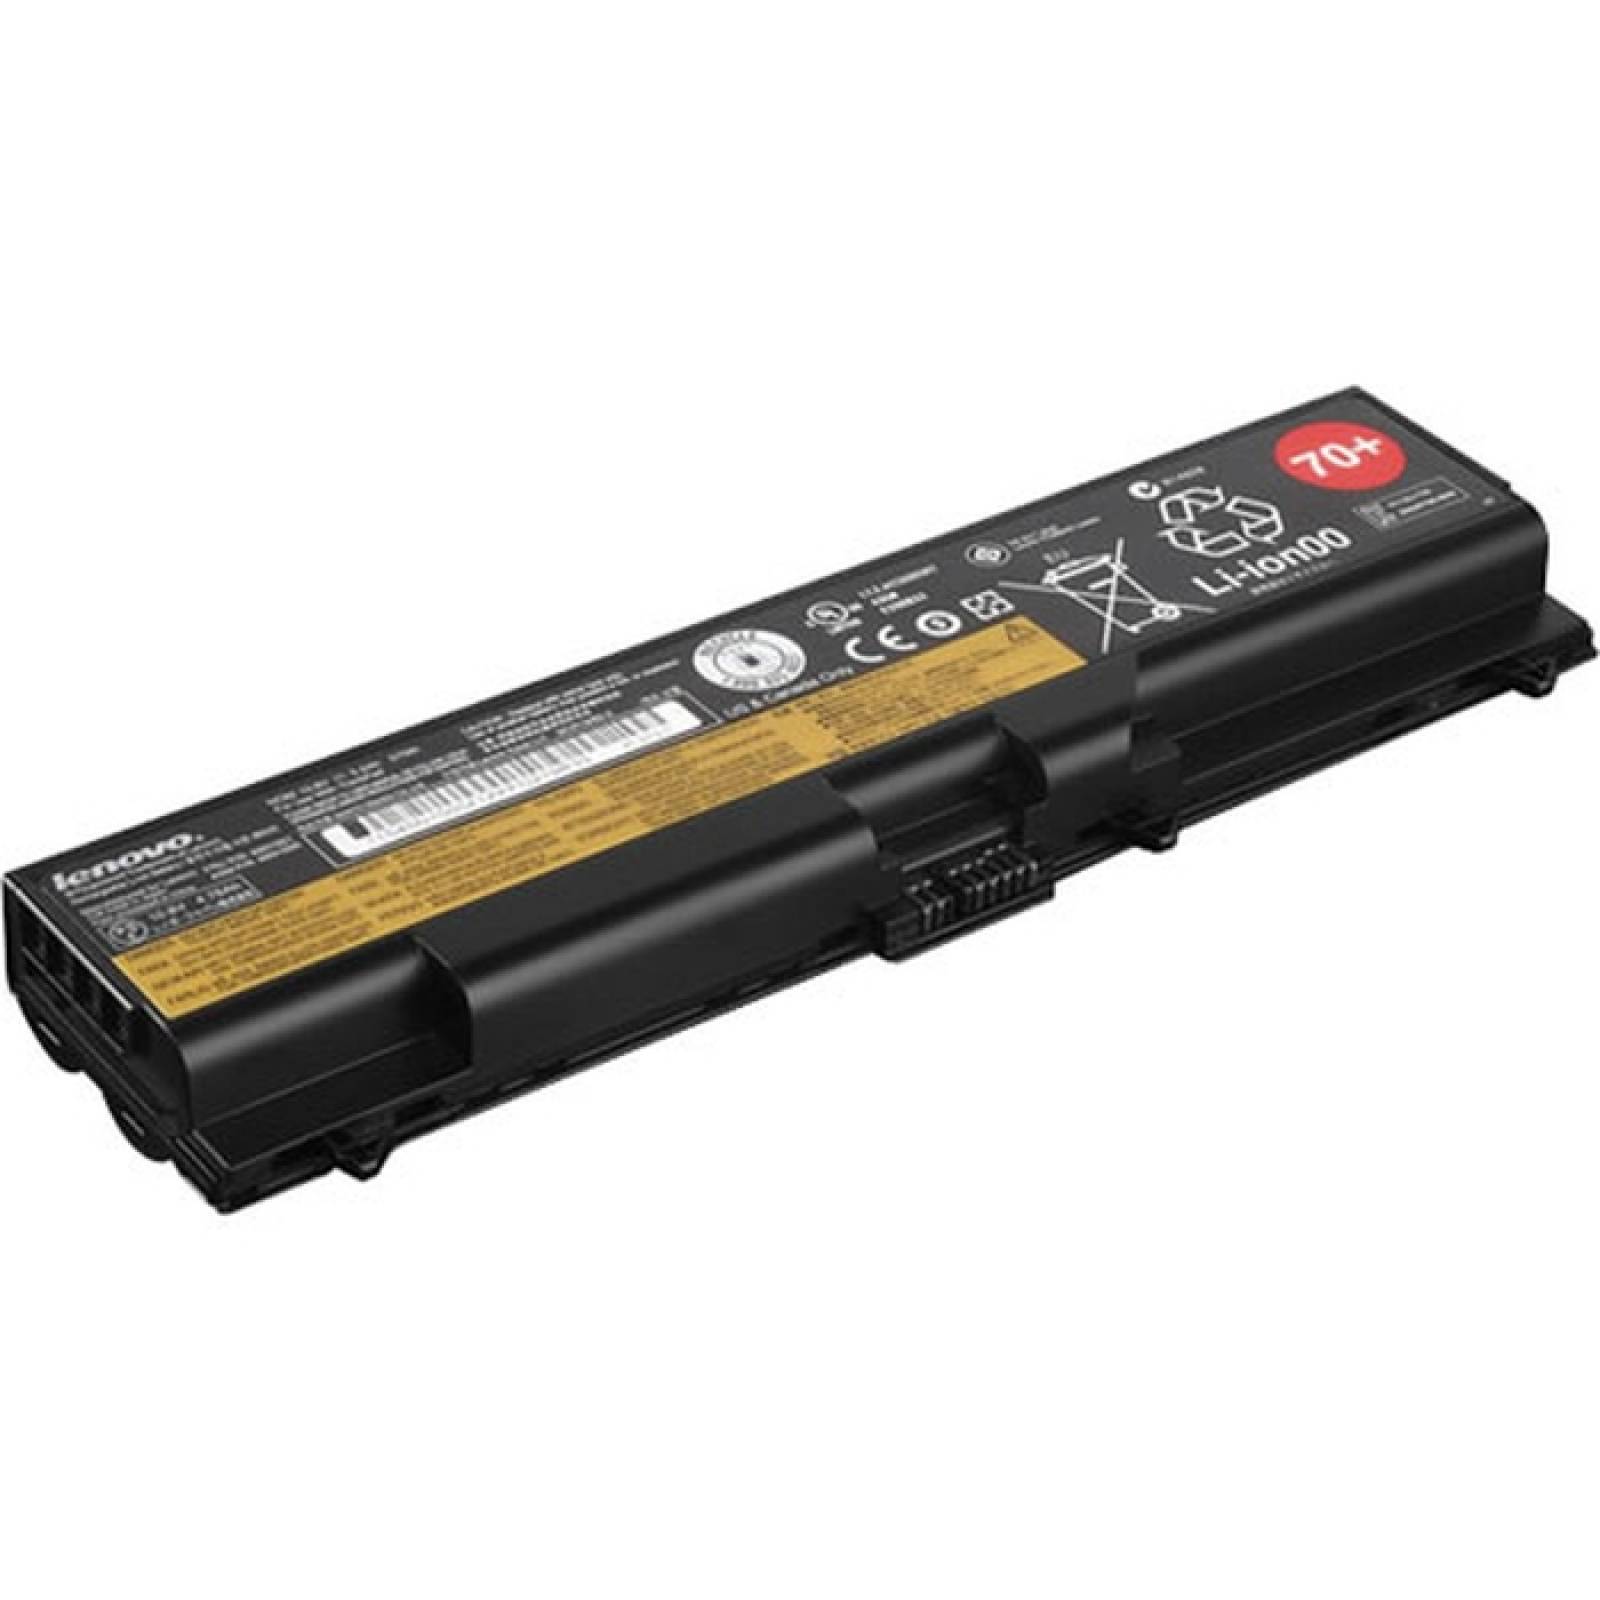 Lenovo Battery ThinkPad Battery 70 57 Wh 6 cell T410  2030 Series